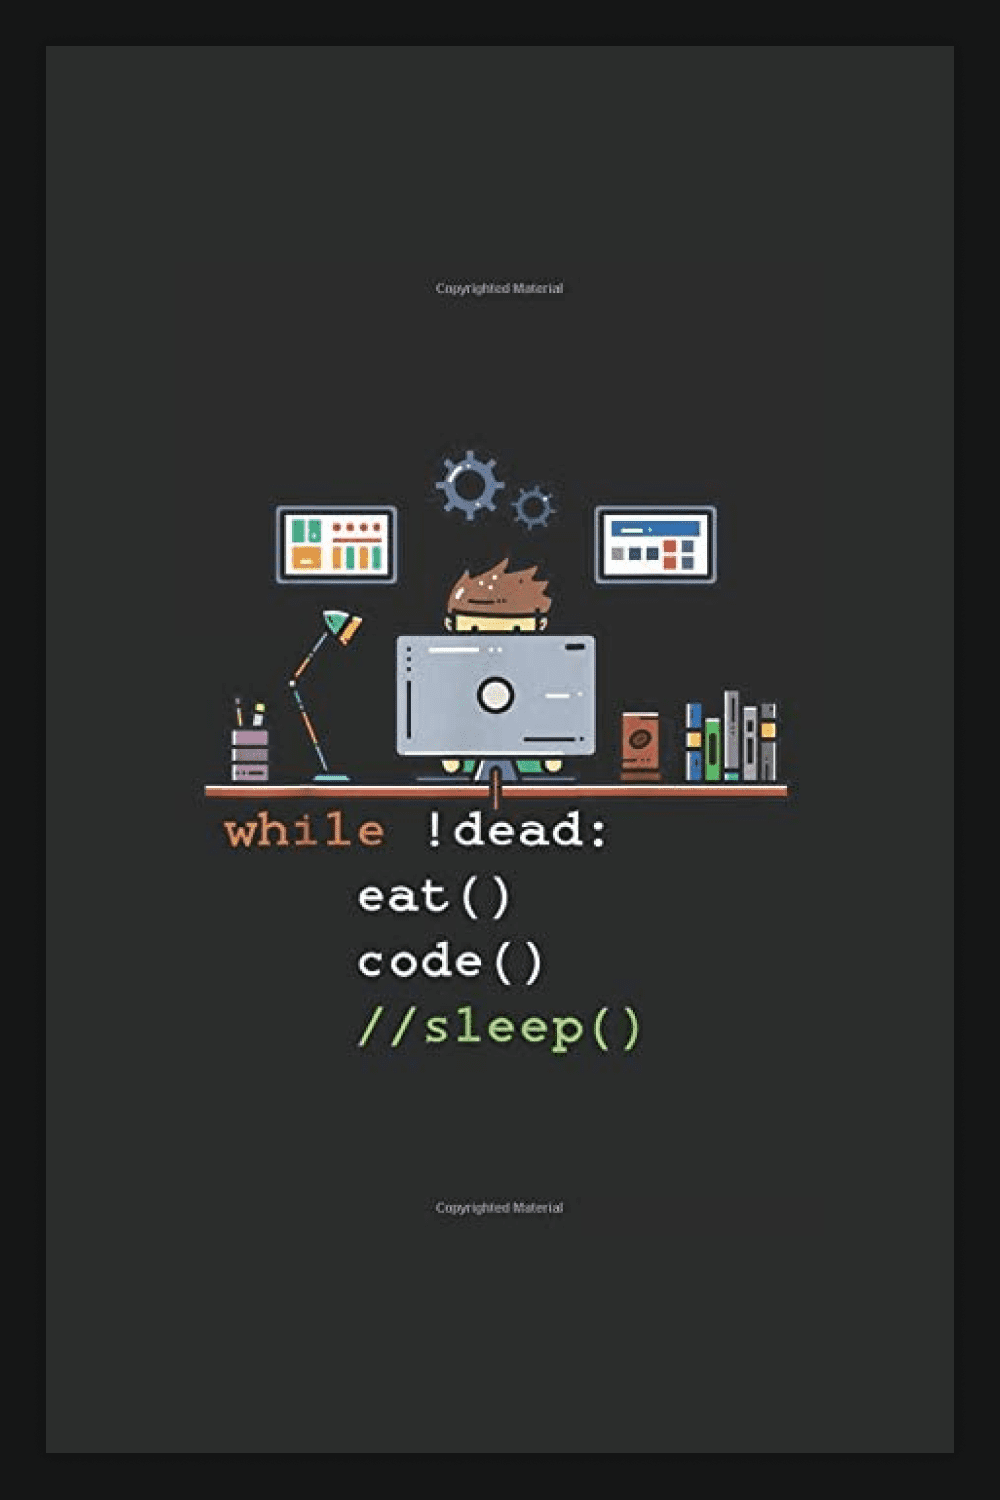 The cover of the book Computer Science Python Programmer Eat Code Sleep Notebook.